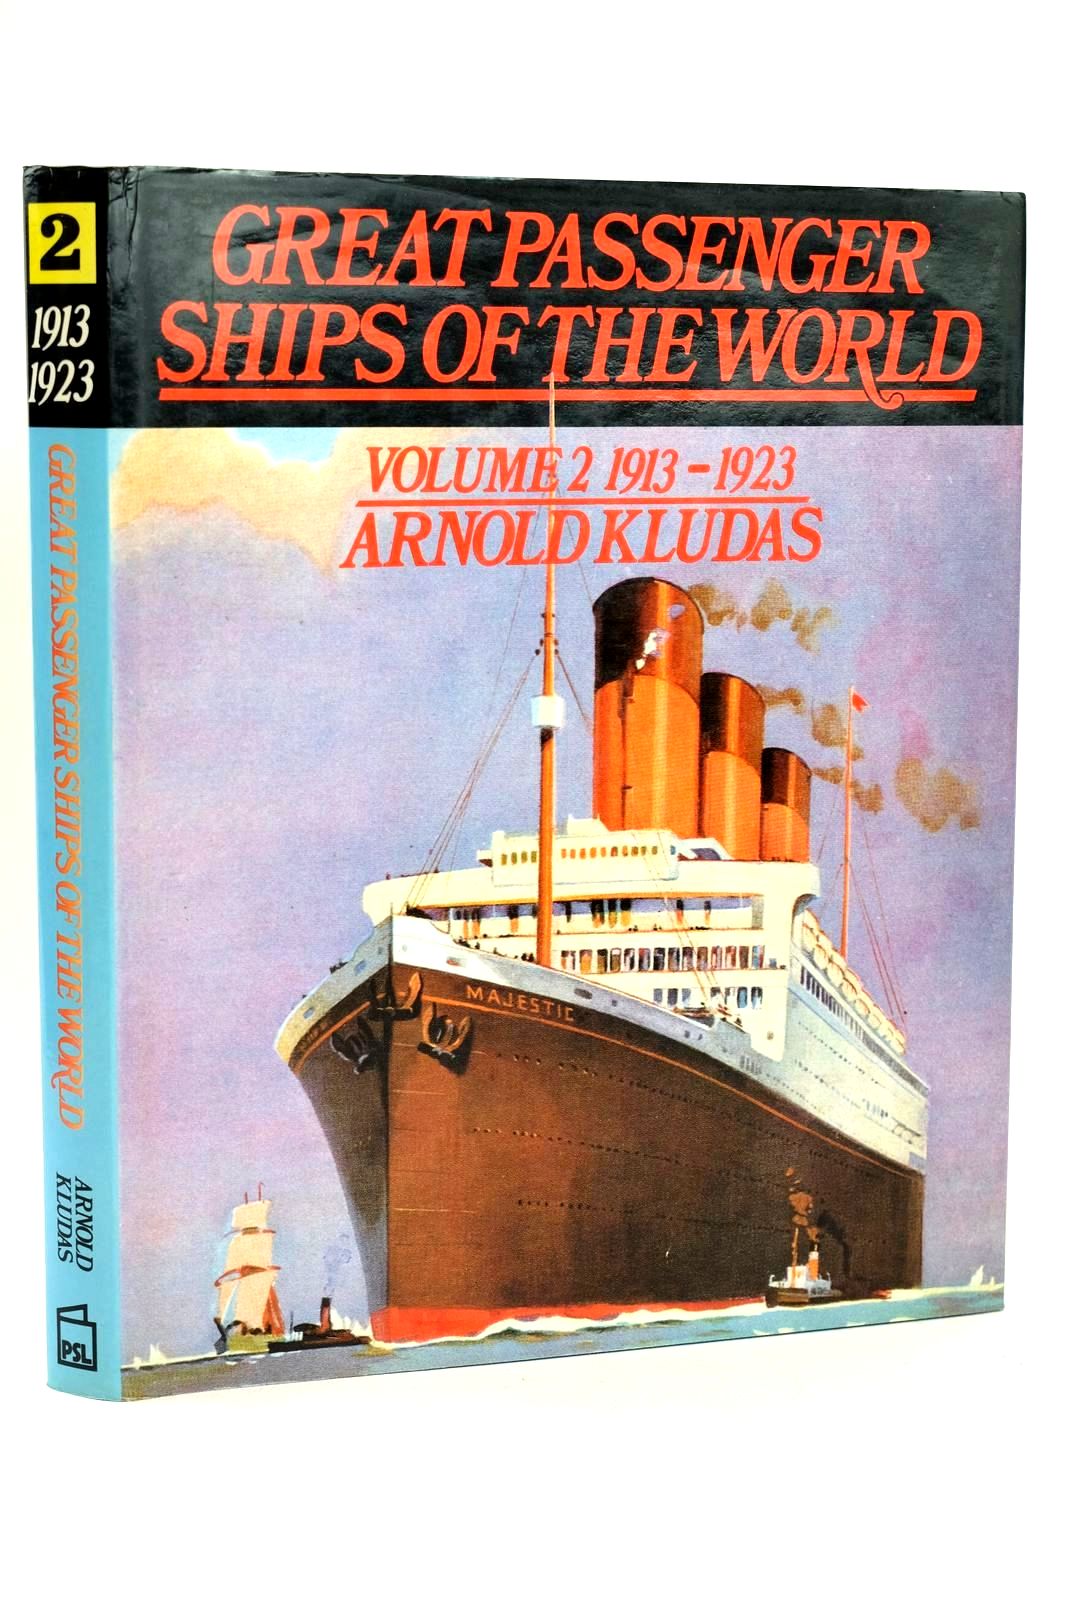 Photo of GREAT PASSENGER SHIPS OF THE WORLD VOLUME 2 1913-1923 written by Kludas, Arnold published by Patrick Stephens (STOCK CODE: 1318549)  for sale by Stella & Rose's Books